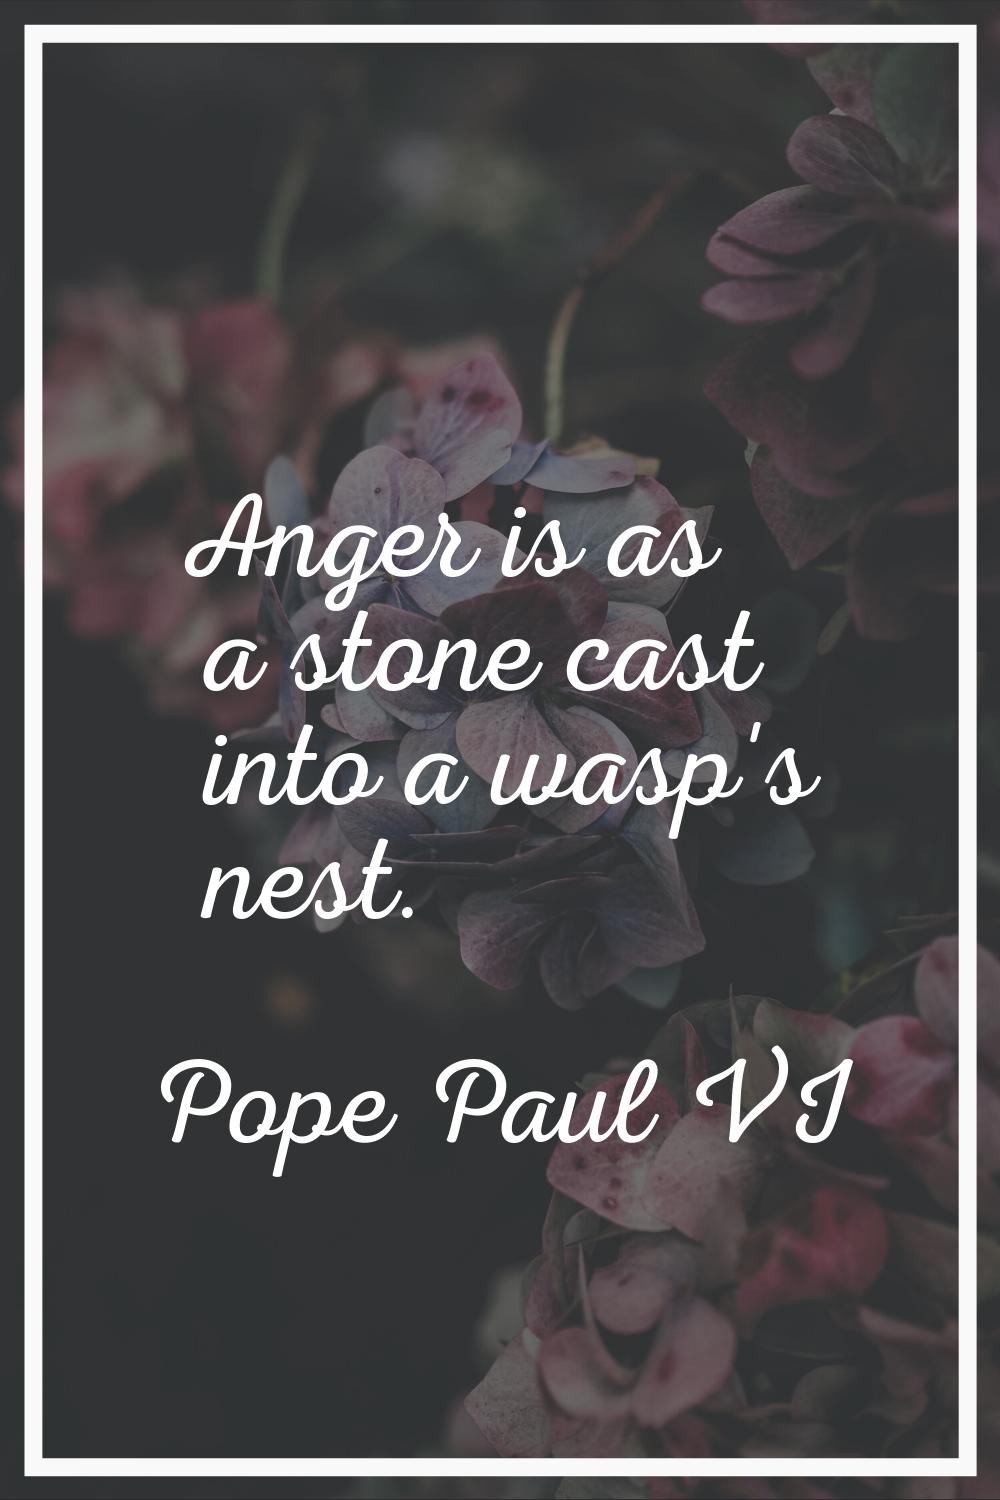 Anger is as a stone cast into a wasp's nest.